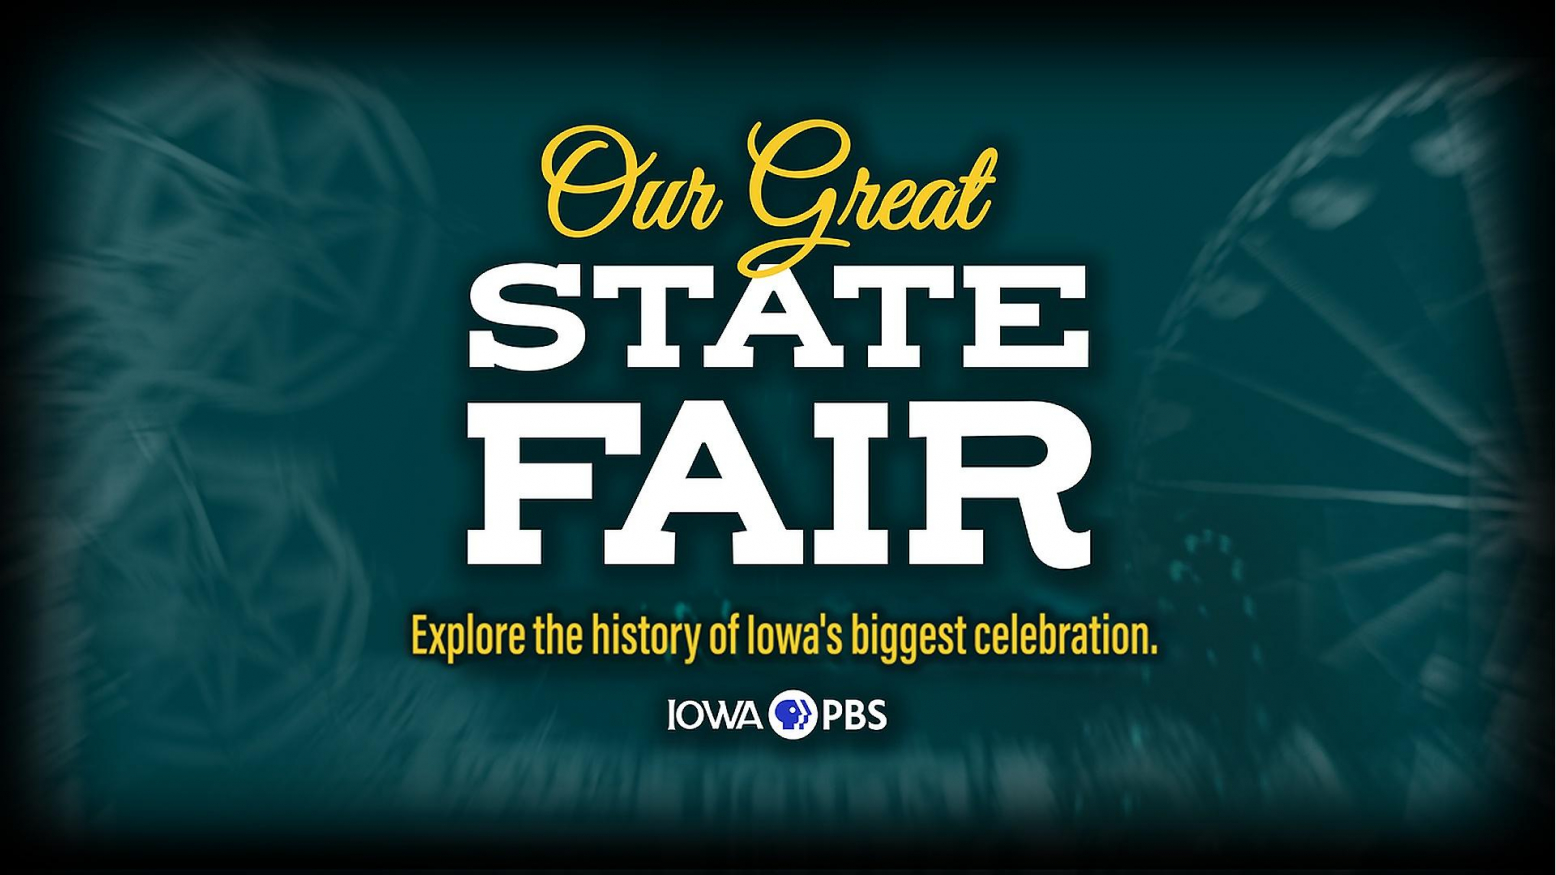 Our Great State Fair show logo and tagline "Explore the history of Iowa's biggest celebration"